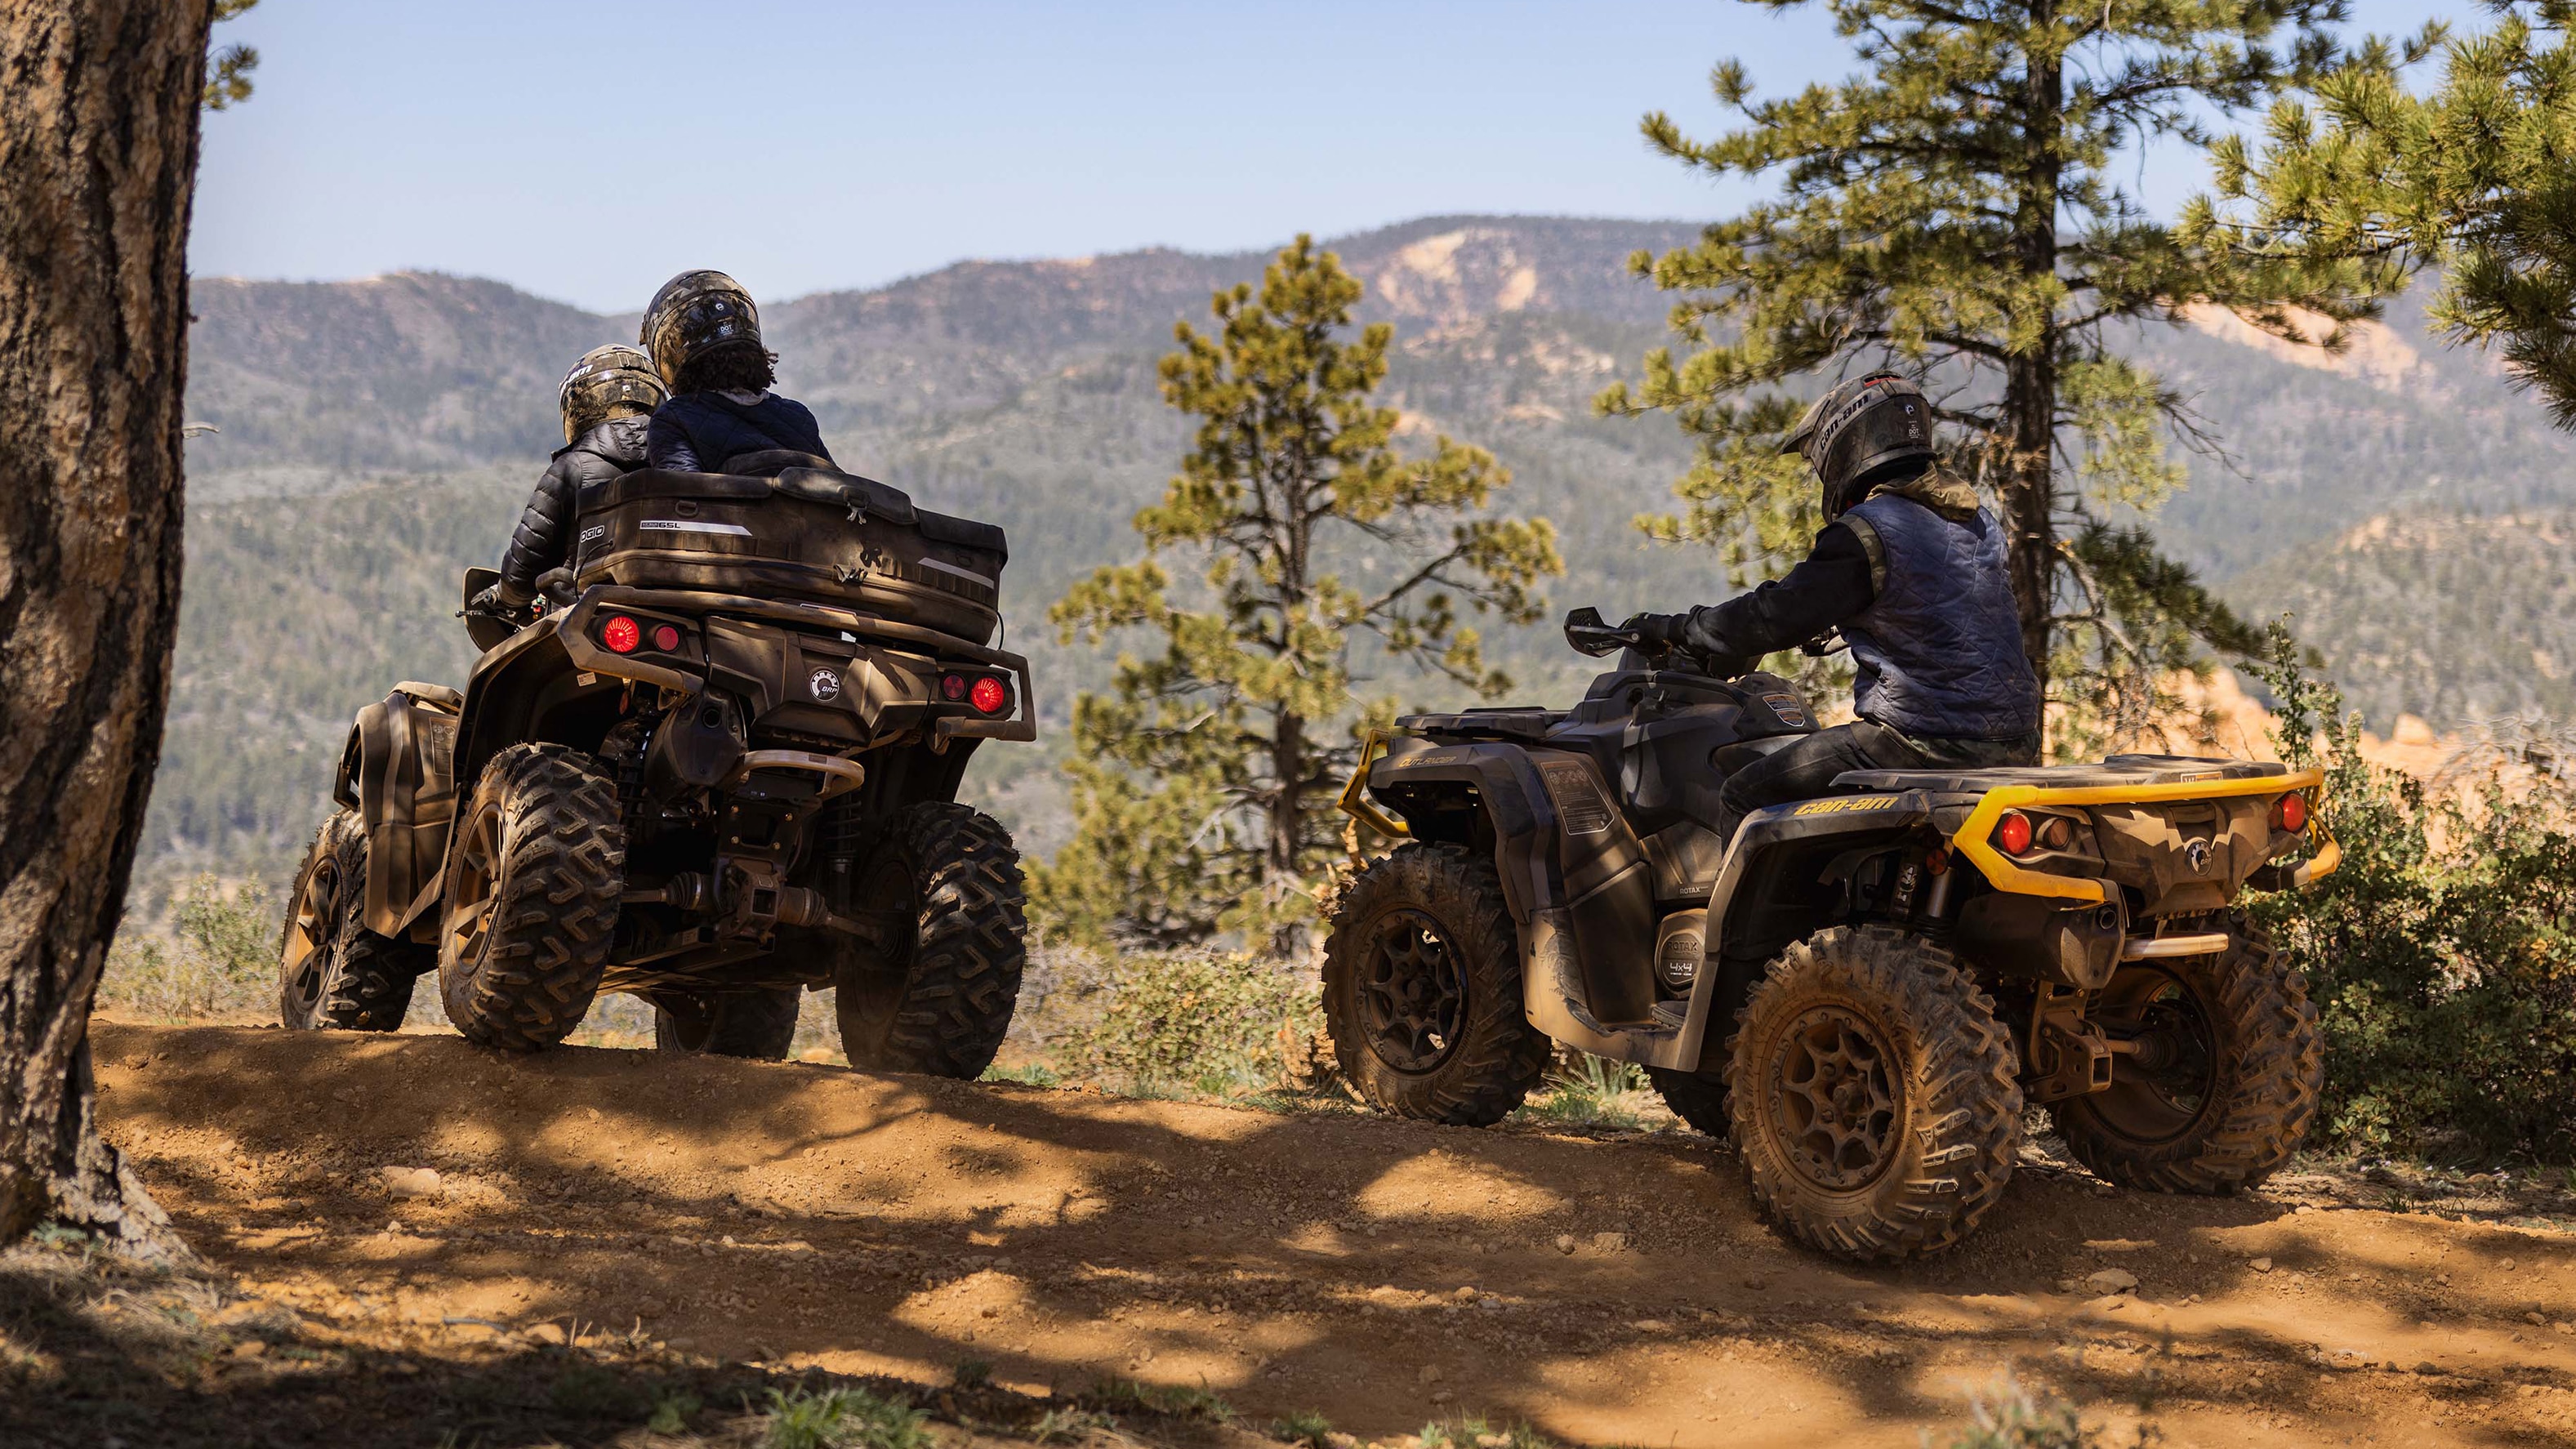 Riders driving an ATV Can-Am vehicle.